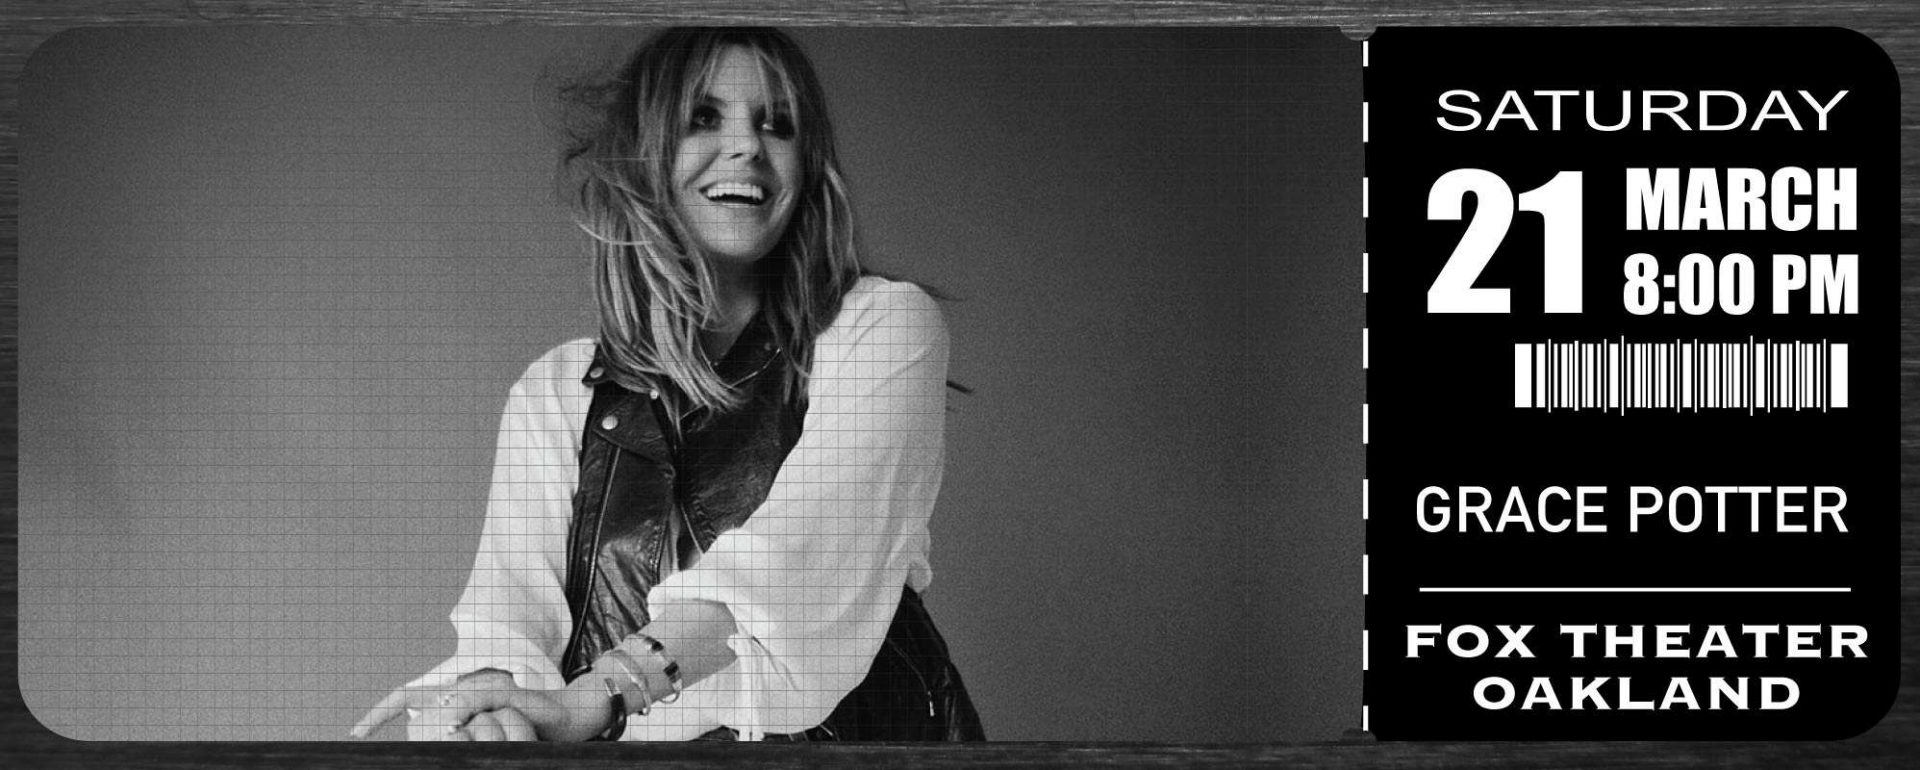 Grace Potter at Fox Theater Oakland